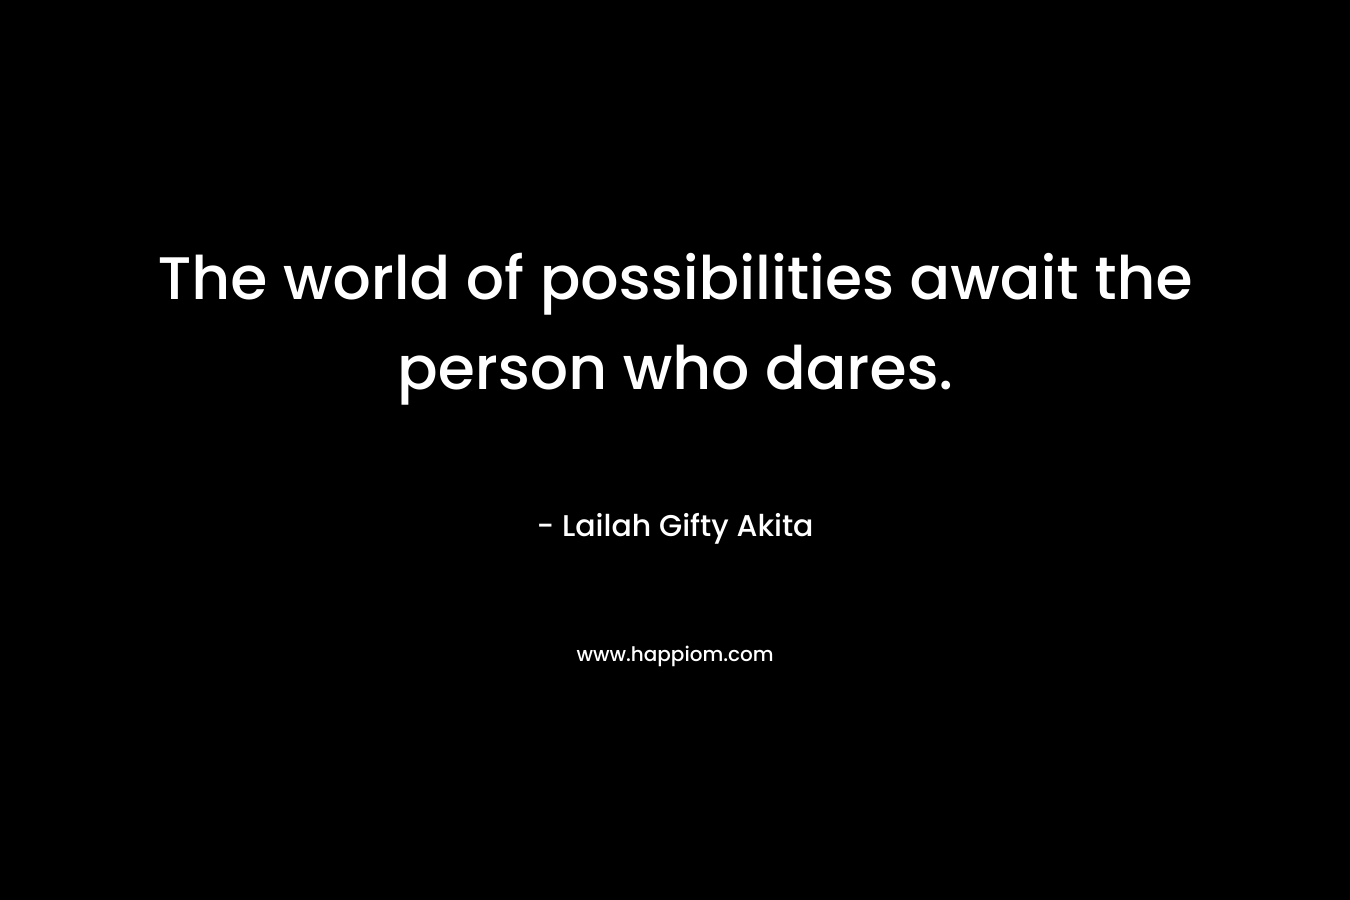 The world of possibilities await the person who dares. – Lailah Gifty Akita